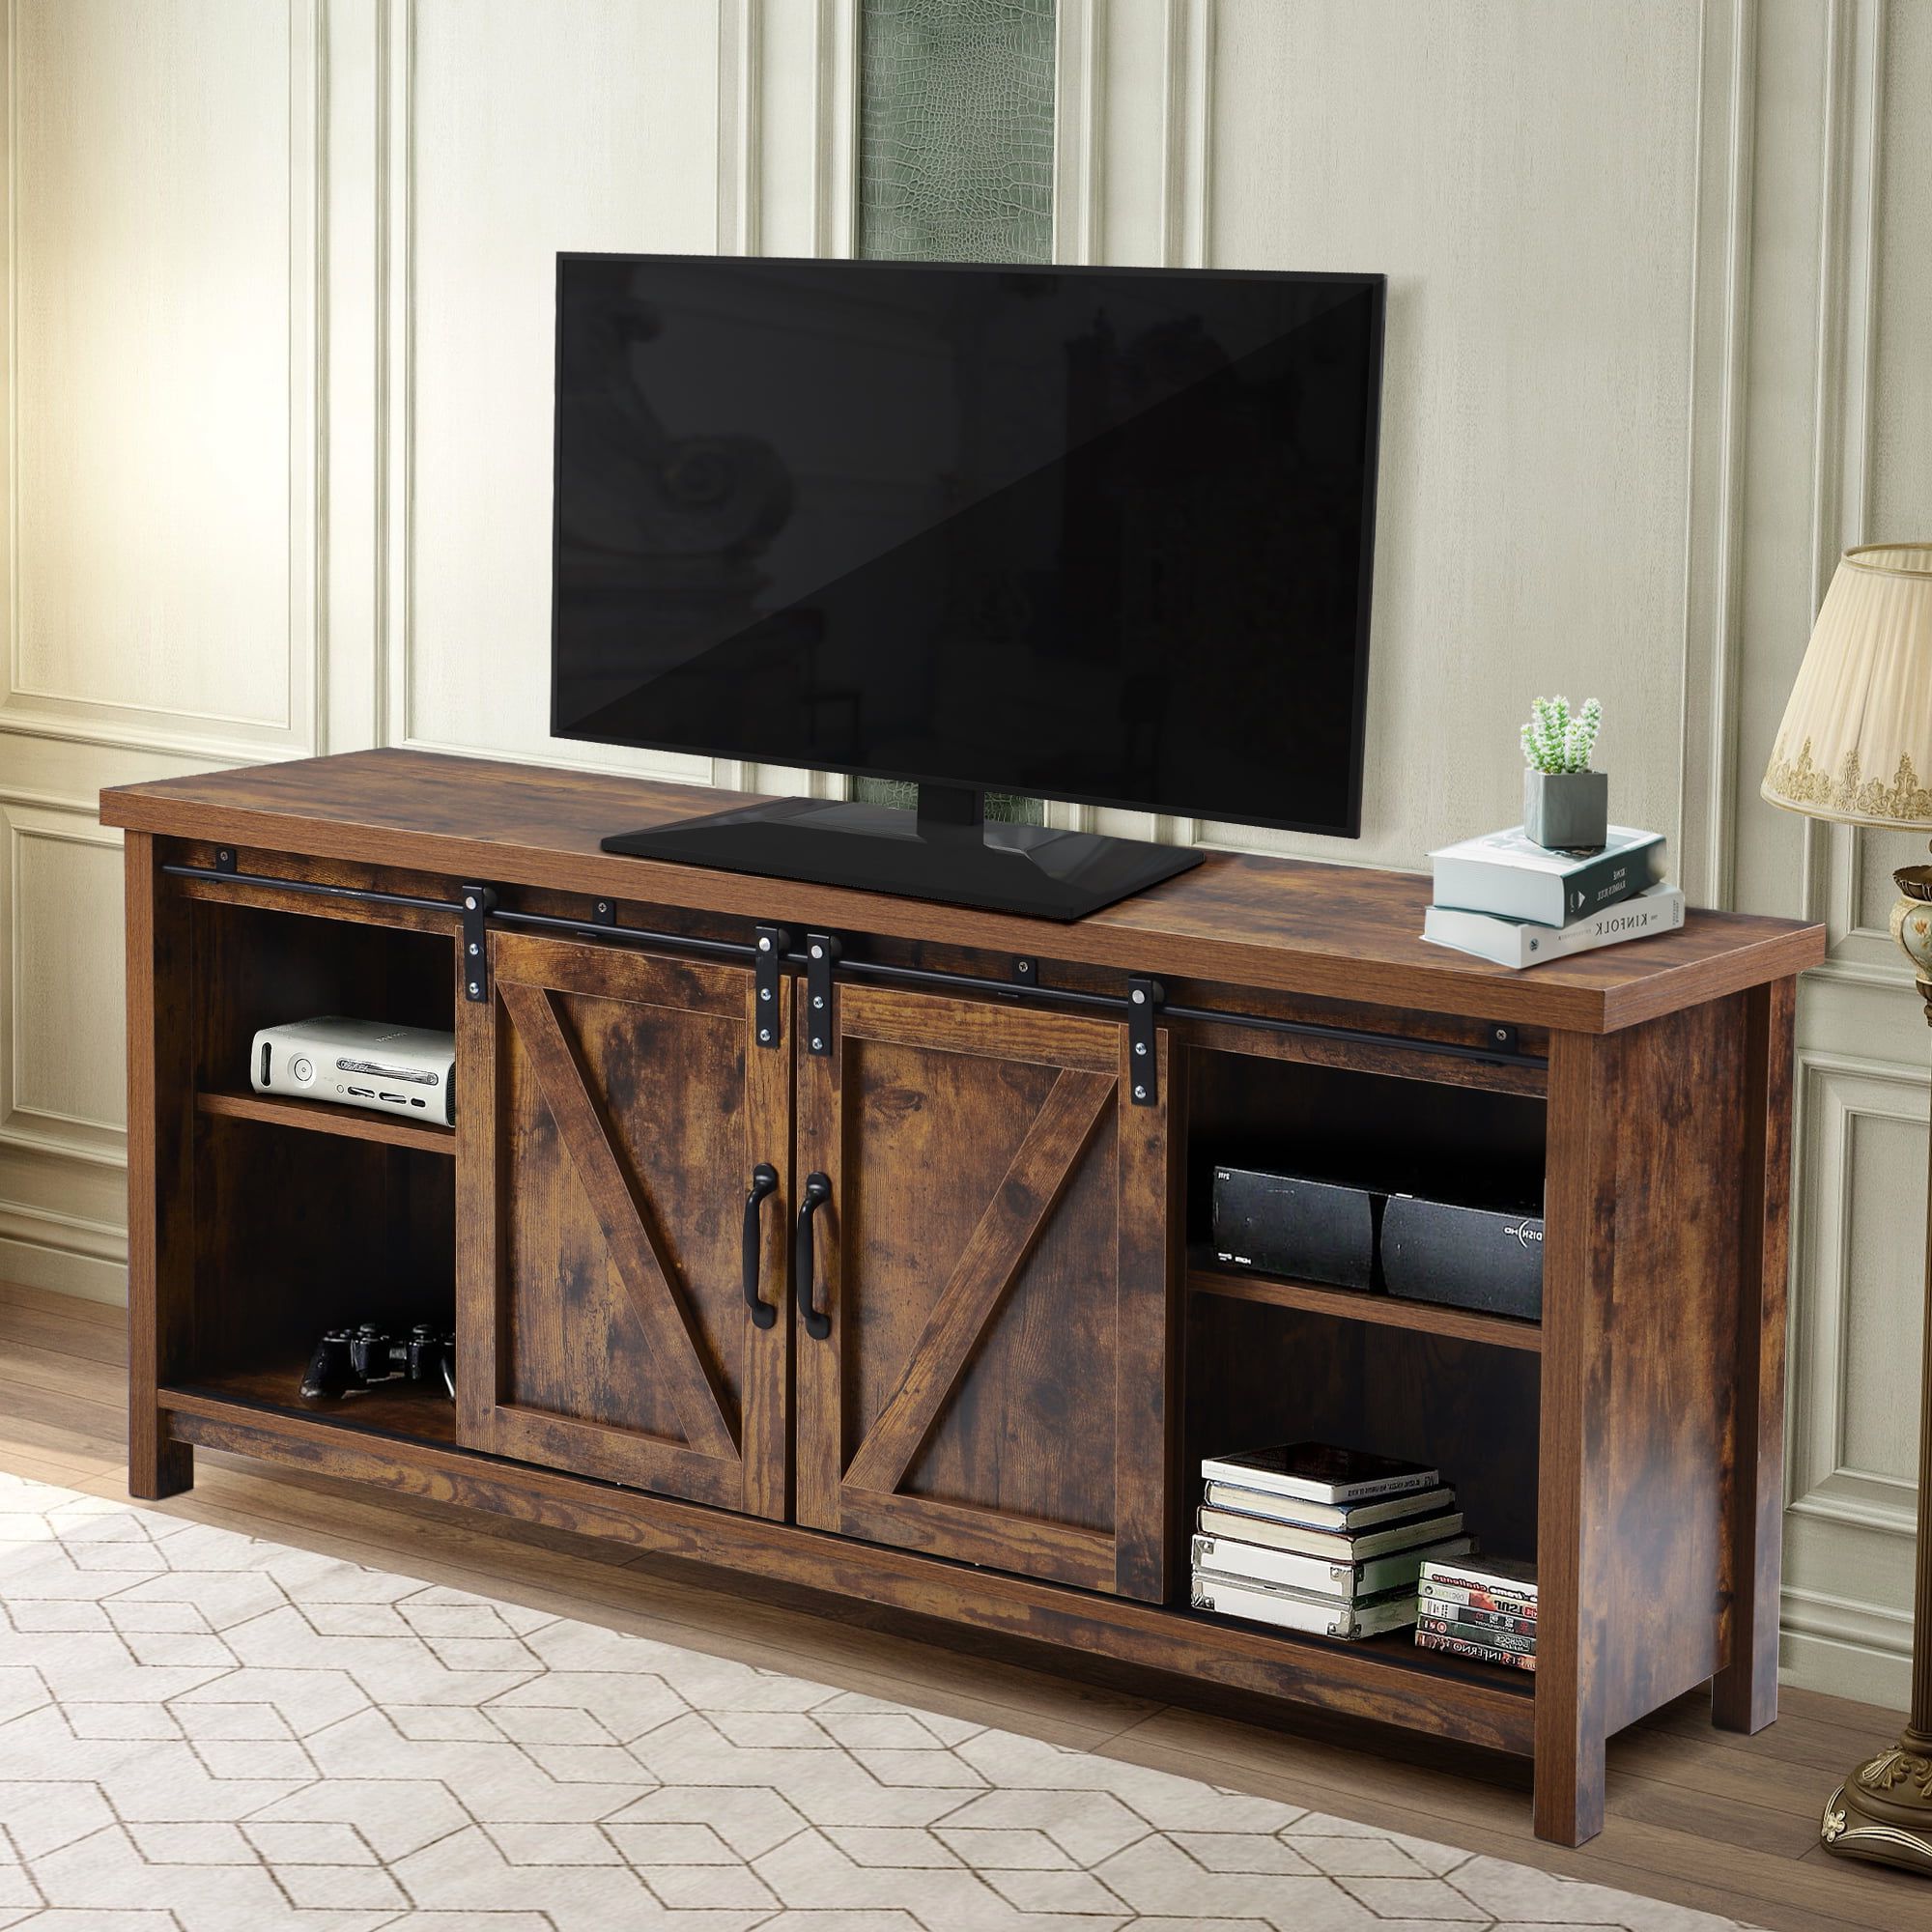 Buy Farmhouse 52'' Tv Stands With Adjustable Leg, Segmart Traditional Intended For Popular Farmhouse Stands For Tvs (View 12 of 15)